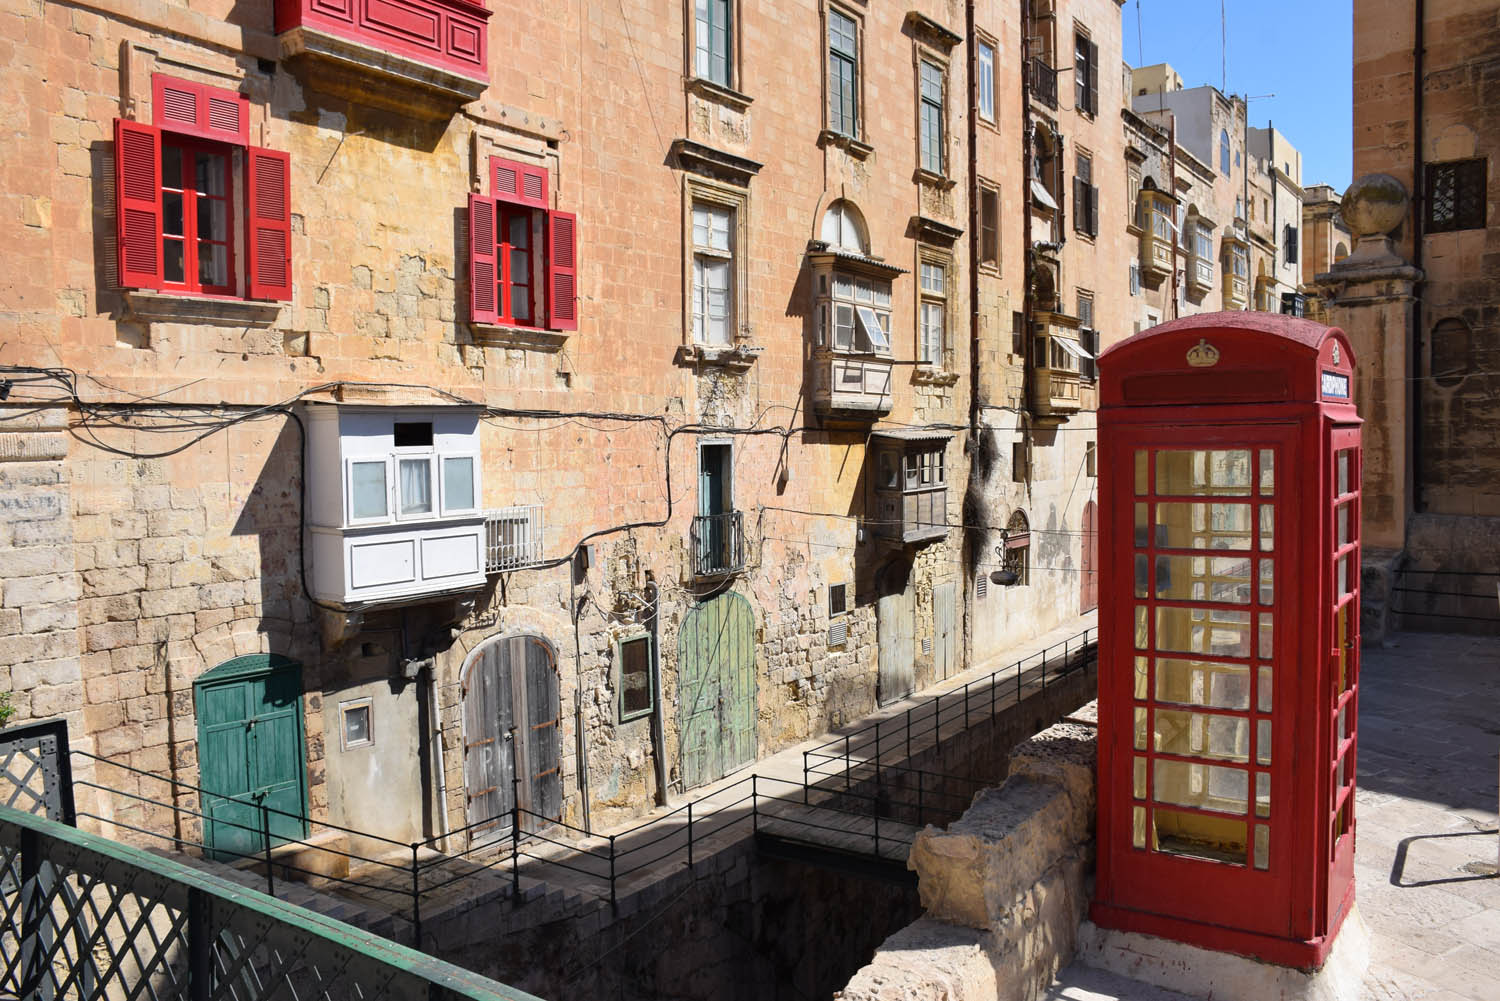 English telephone booth in the Maltese capital, Valletta - heritage of the colonial past